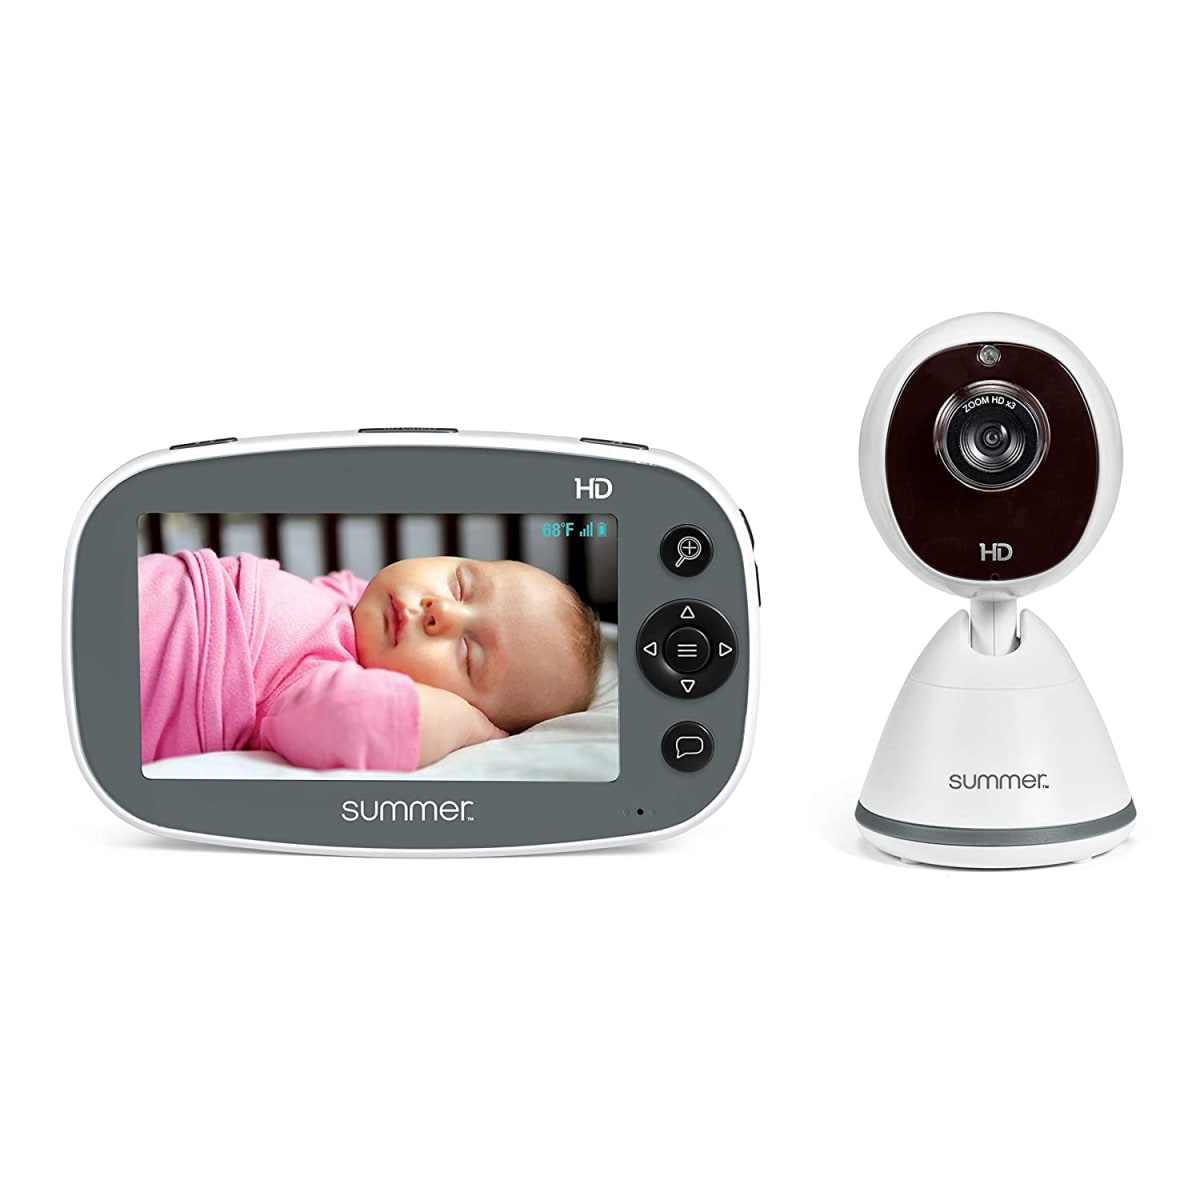 Pure HD 4.5” Color Video Baby Monitor